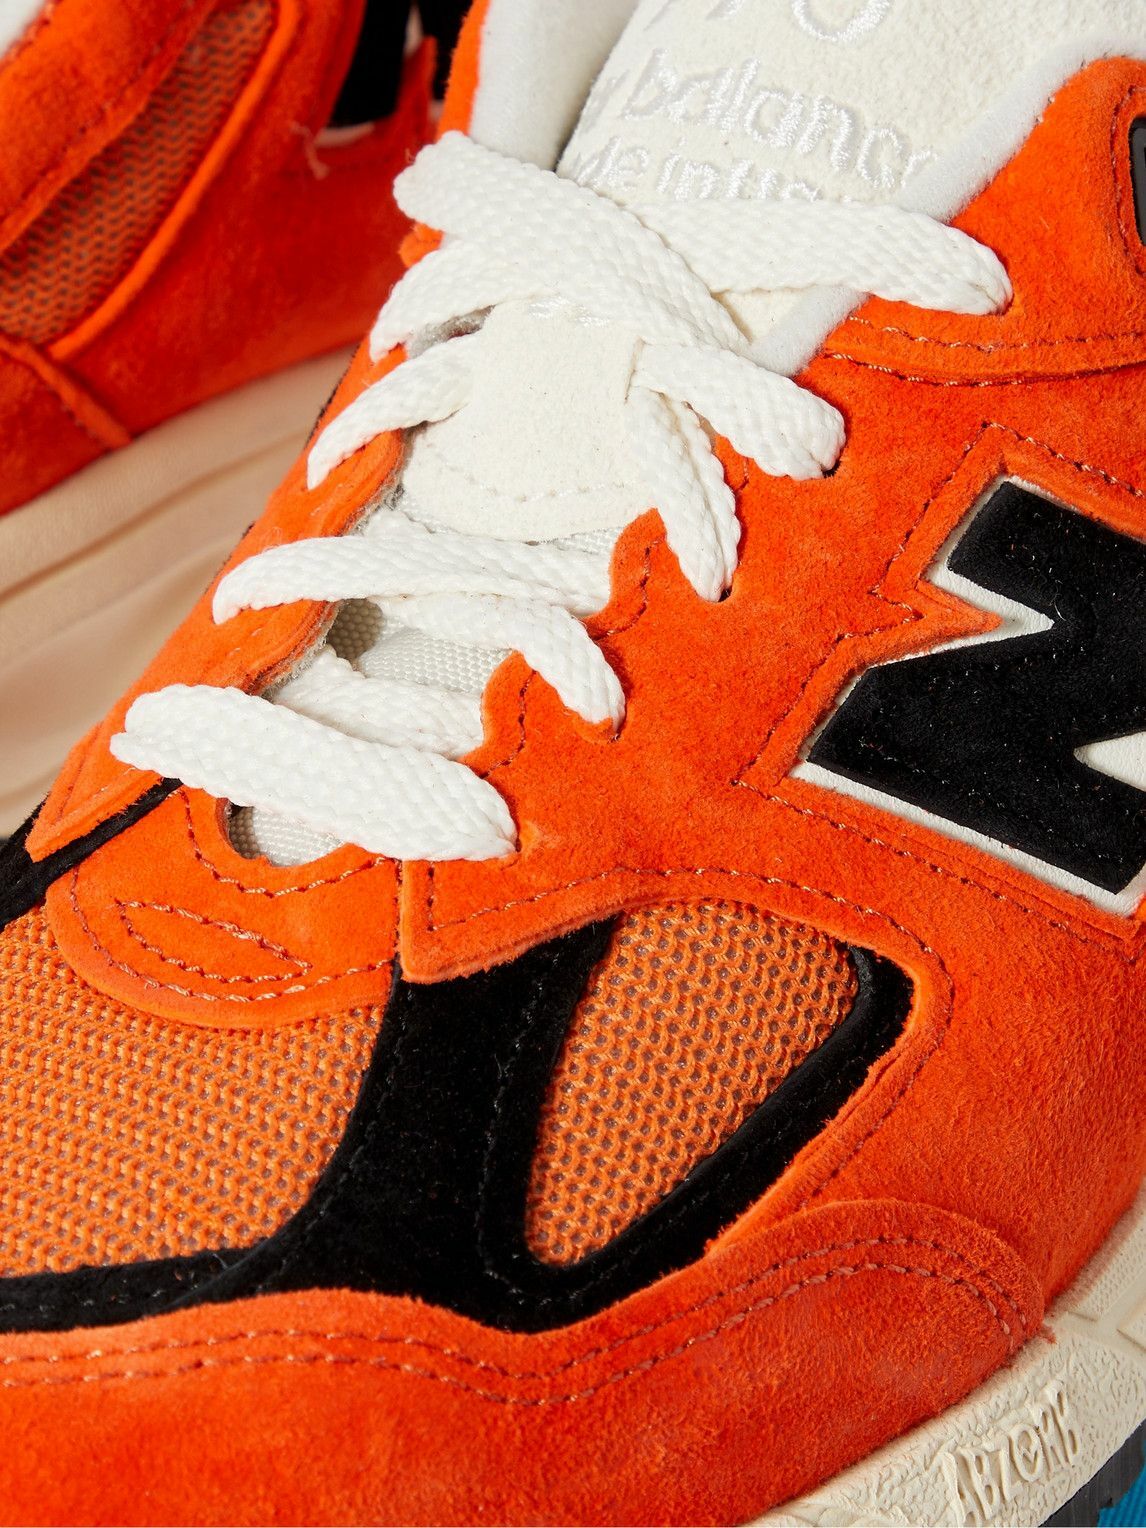 New Balance - Teddy Santis 990v2 Mesh and Suede Sneakers - Orange